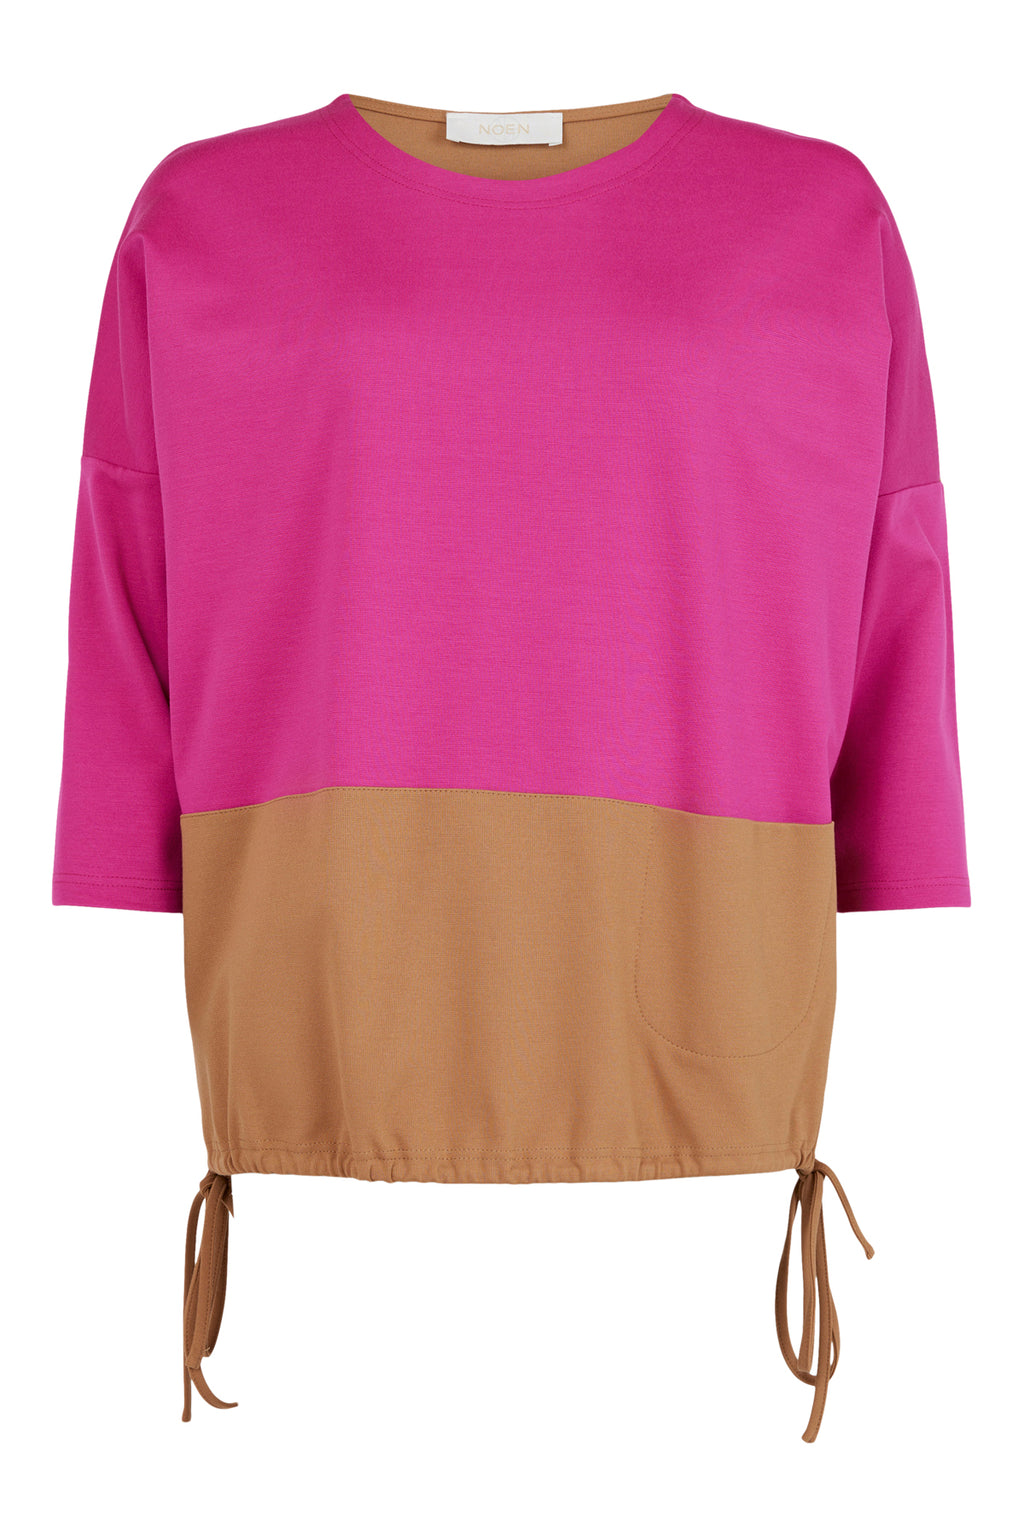 Upgrade your wardrobe with the stunning Noen camel and pink round neck woven top with 3/4 sleeve. This top features interesting detailing with the front top half in pink and the bottom and back in camel. The hemline has unique side splits, gathered hemline, and side ties, adding an extra touch of style.